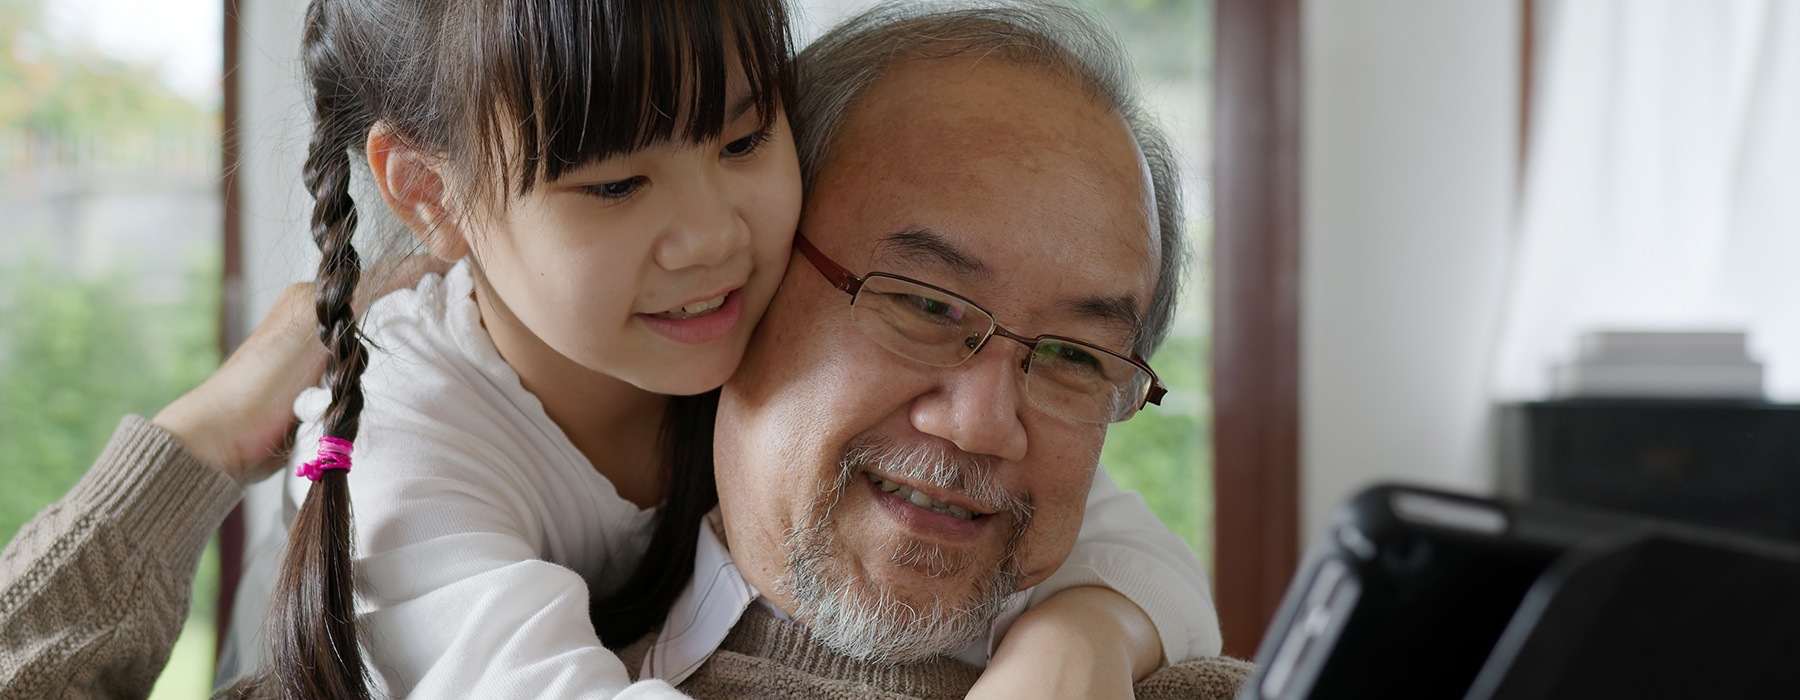 lifestyle image of a older man embracing a girl